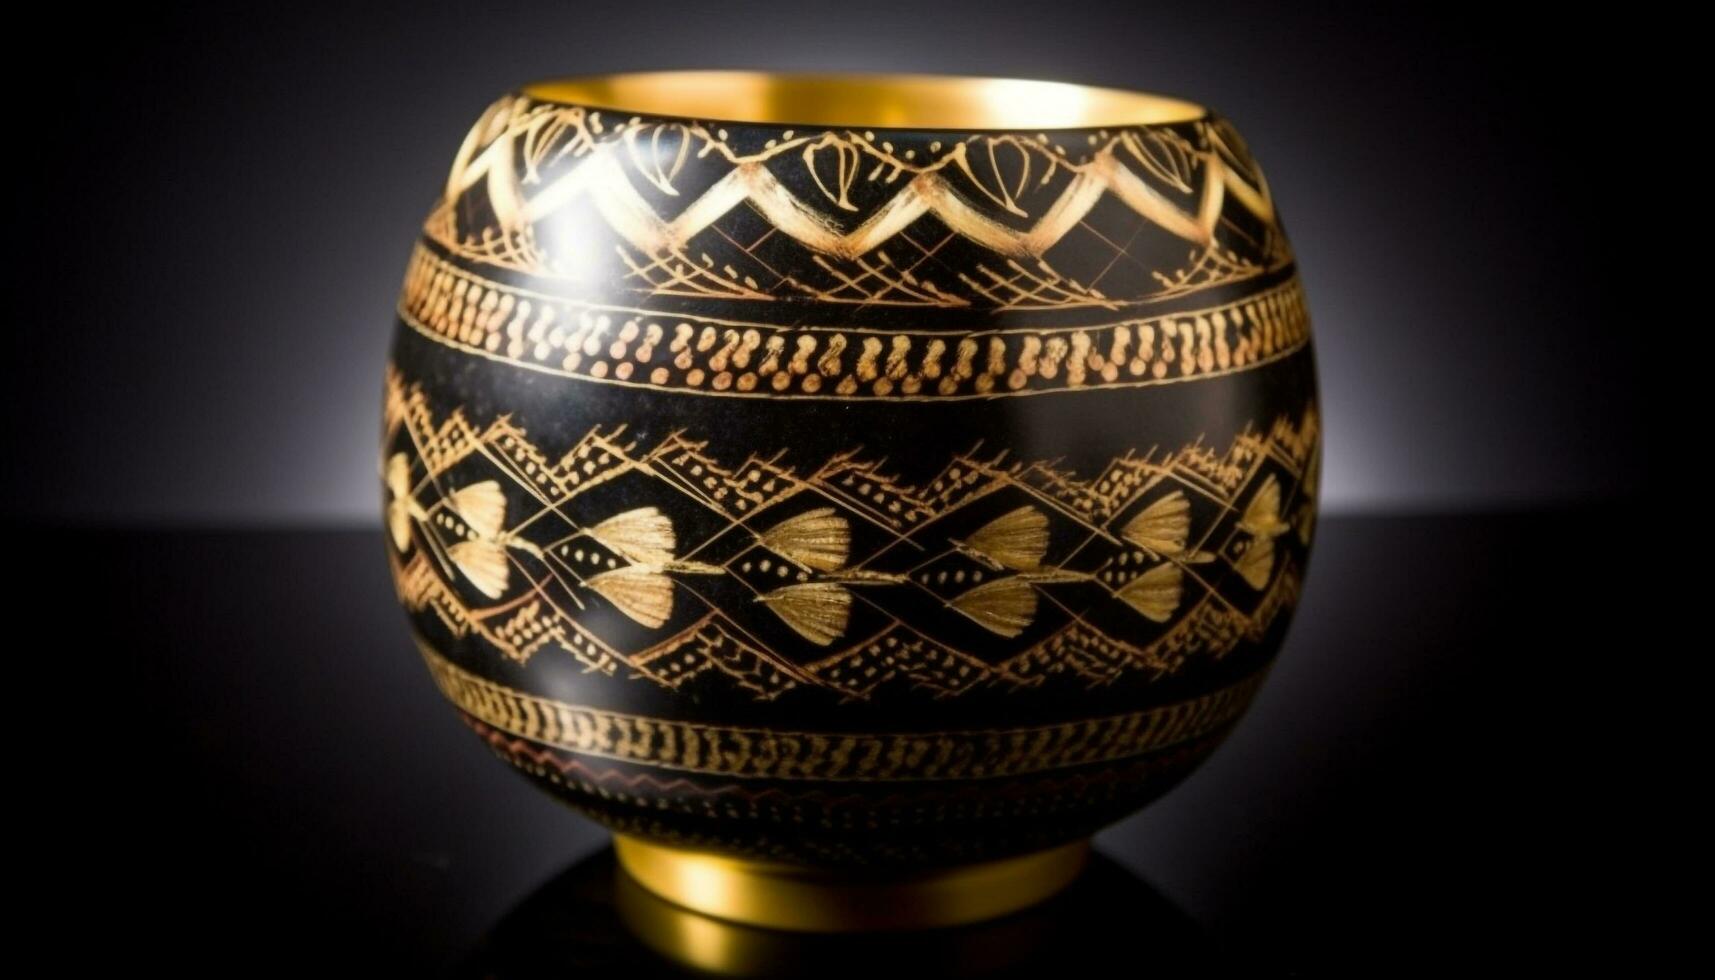 Ancient yellow pottery bowl, ornate pattern, East Asian culture souvenir generated by AI photo